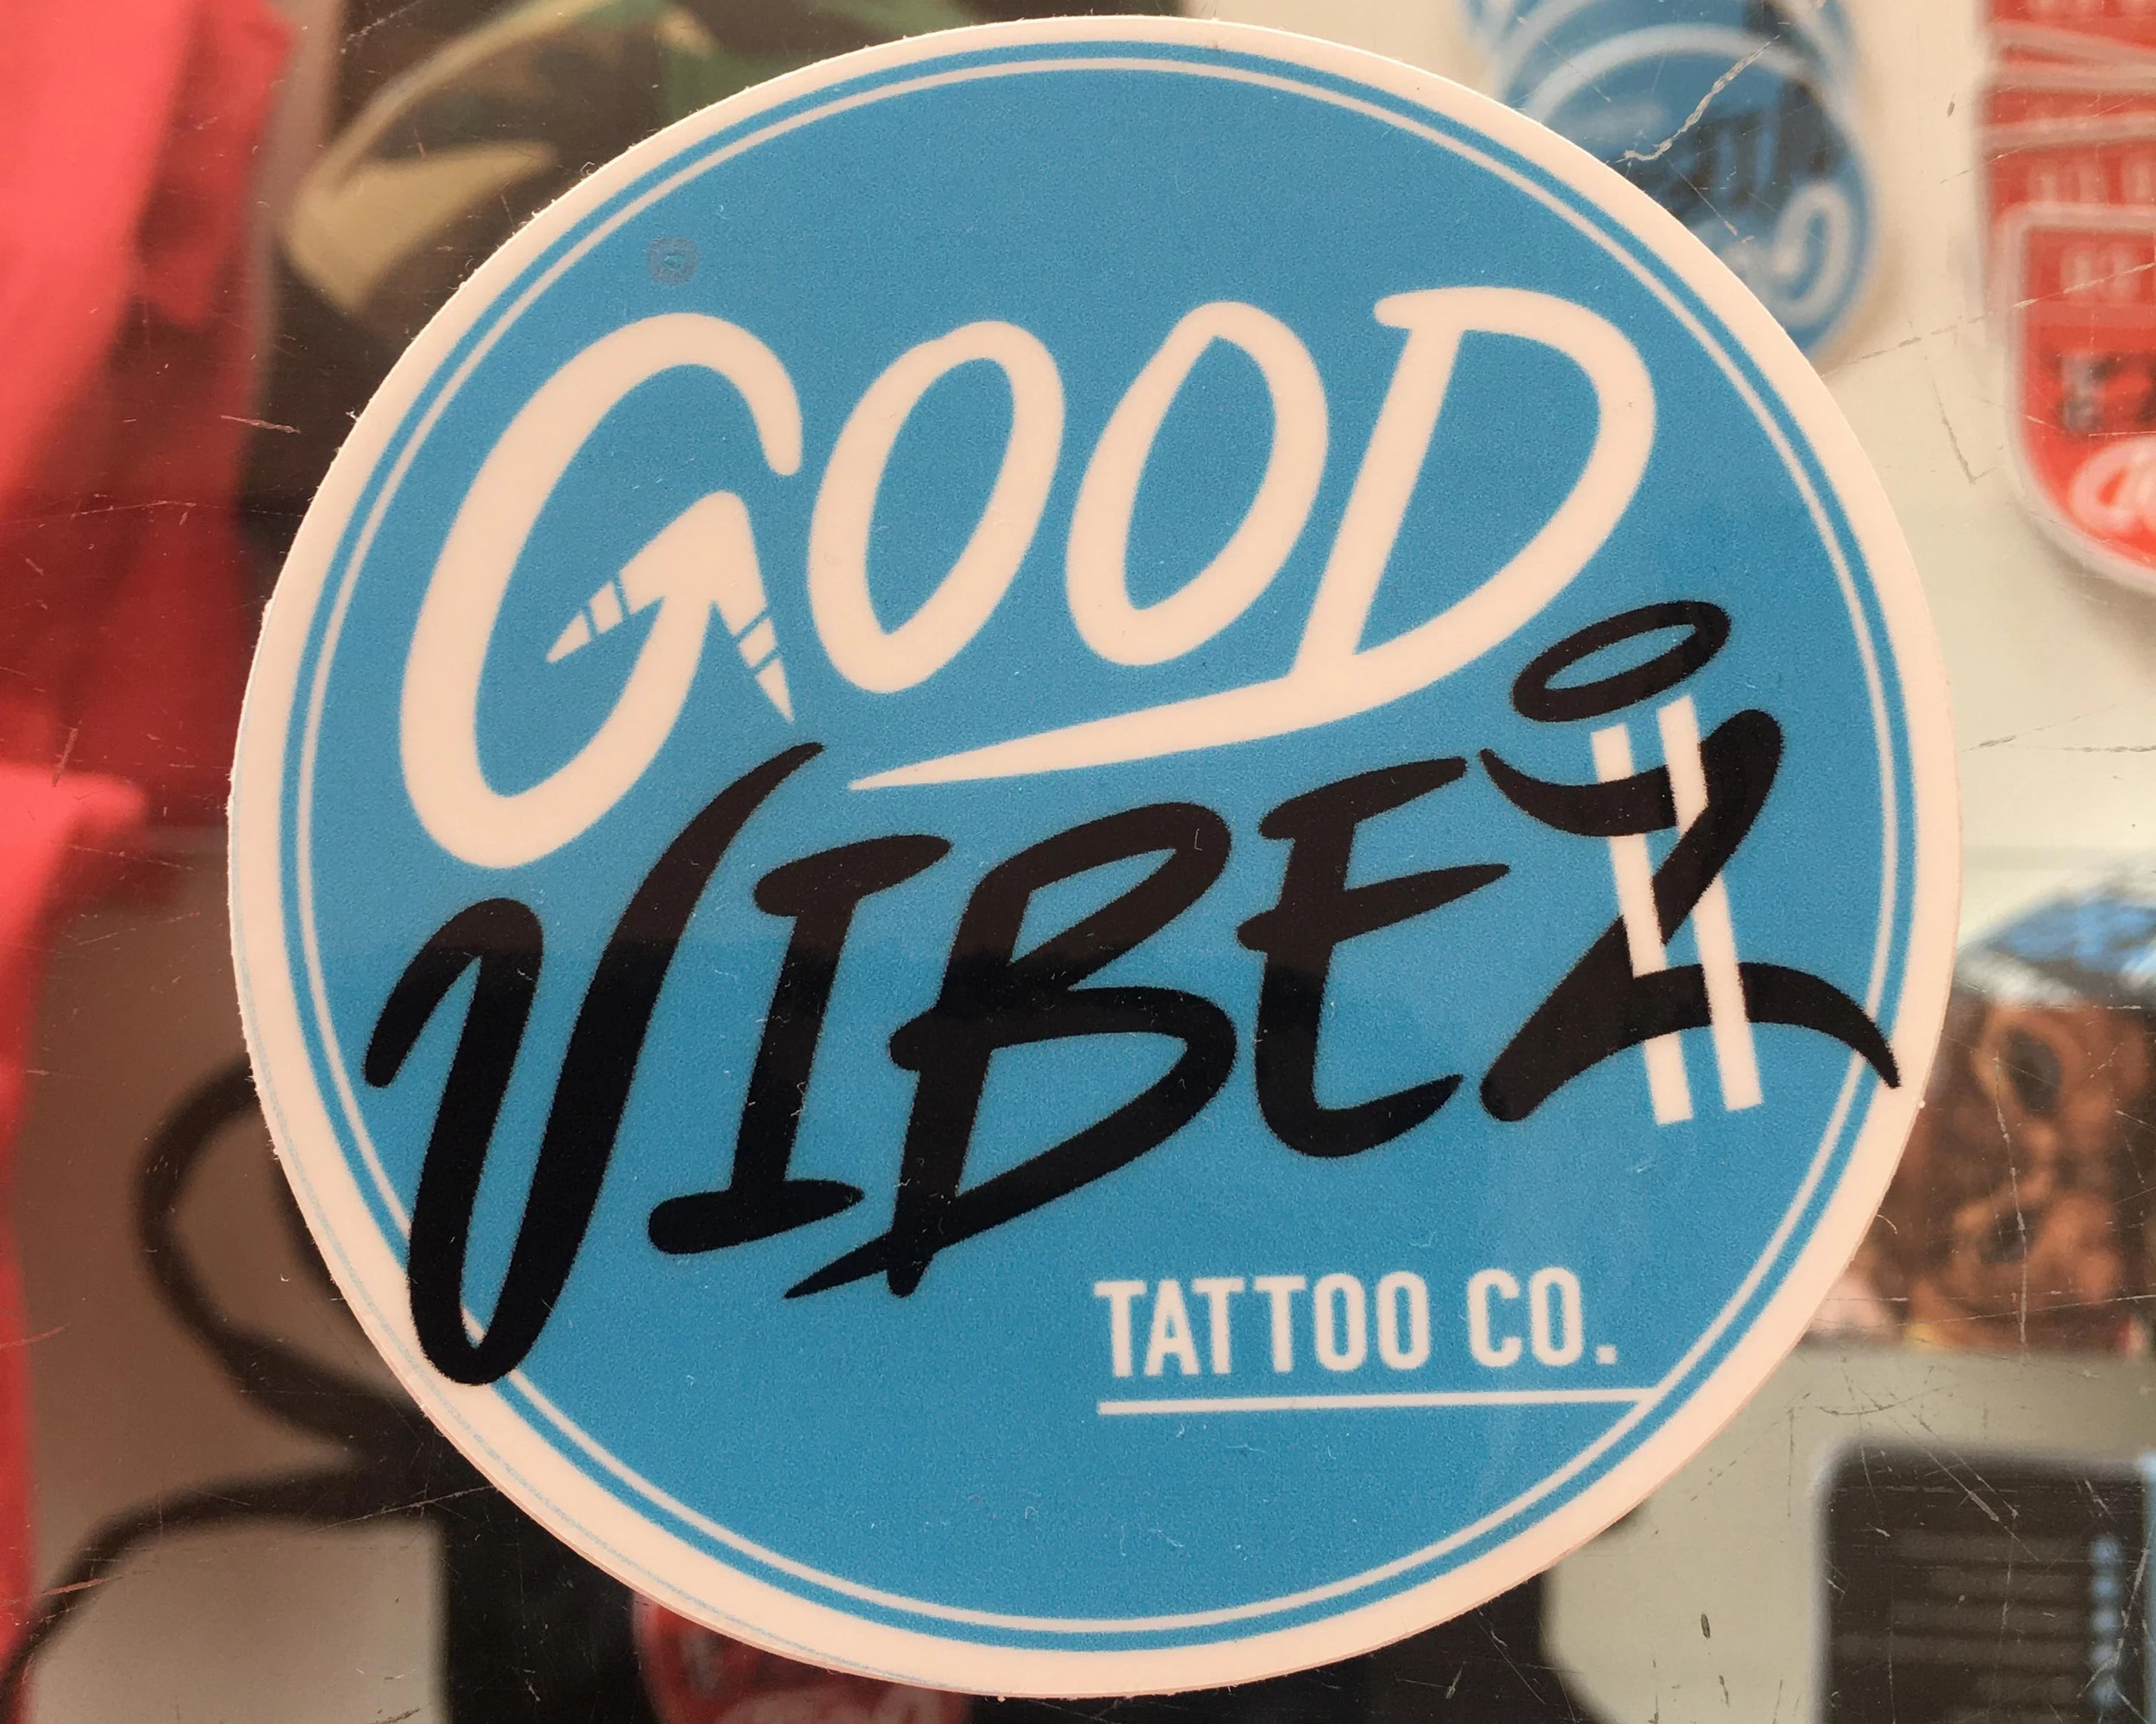 Buy Good Vibes set of 2 Temporary Tattoo Online in India - Etsy